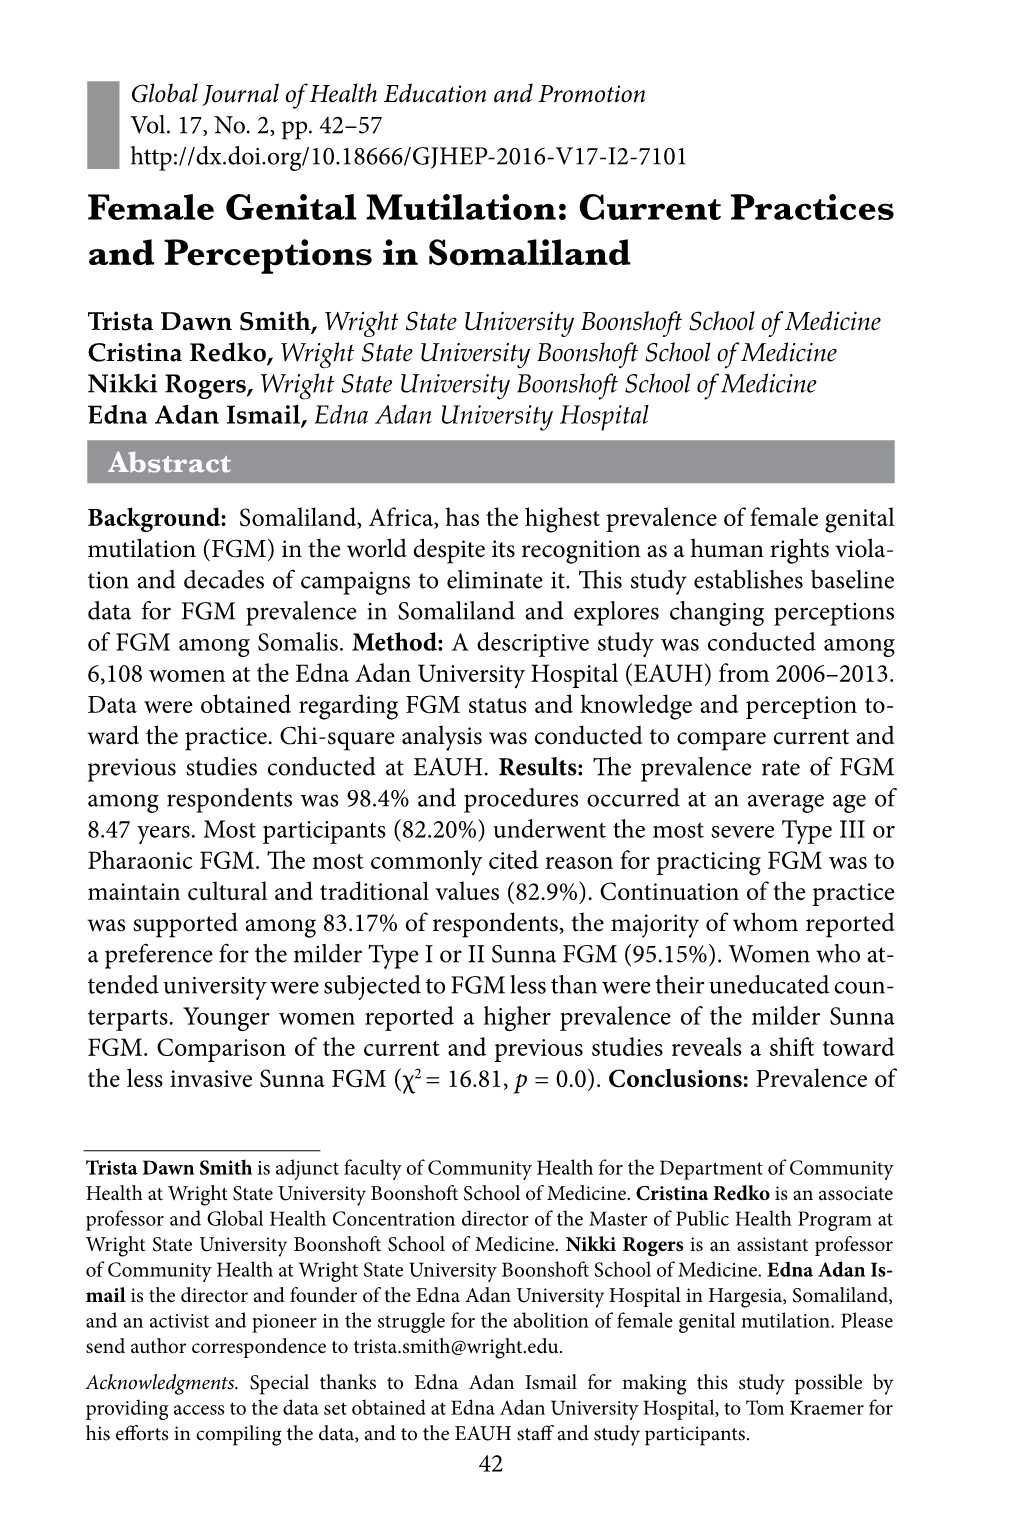 Female Genital Mutilation: Current Practices and Perceptions in Somaliland